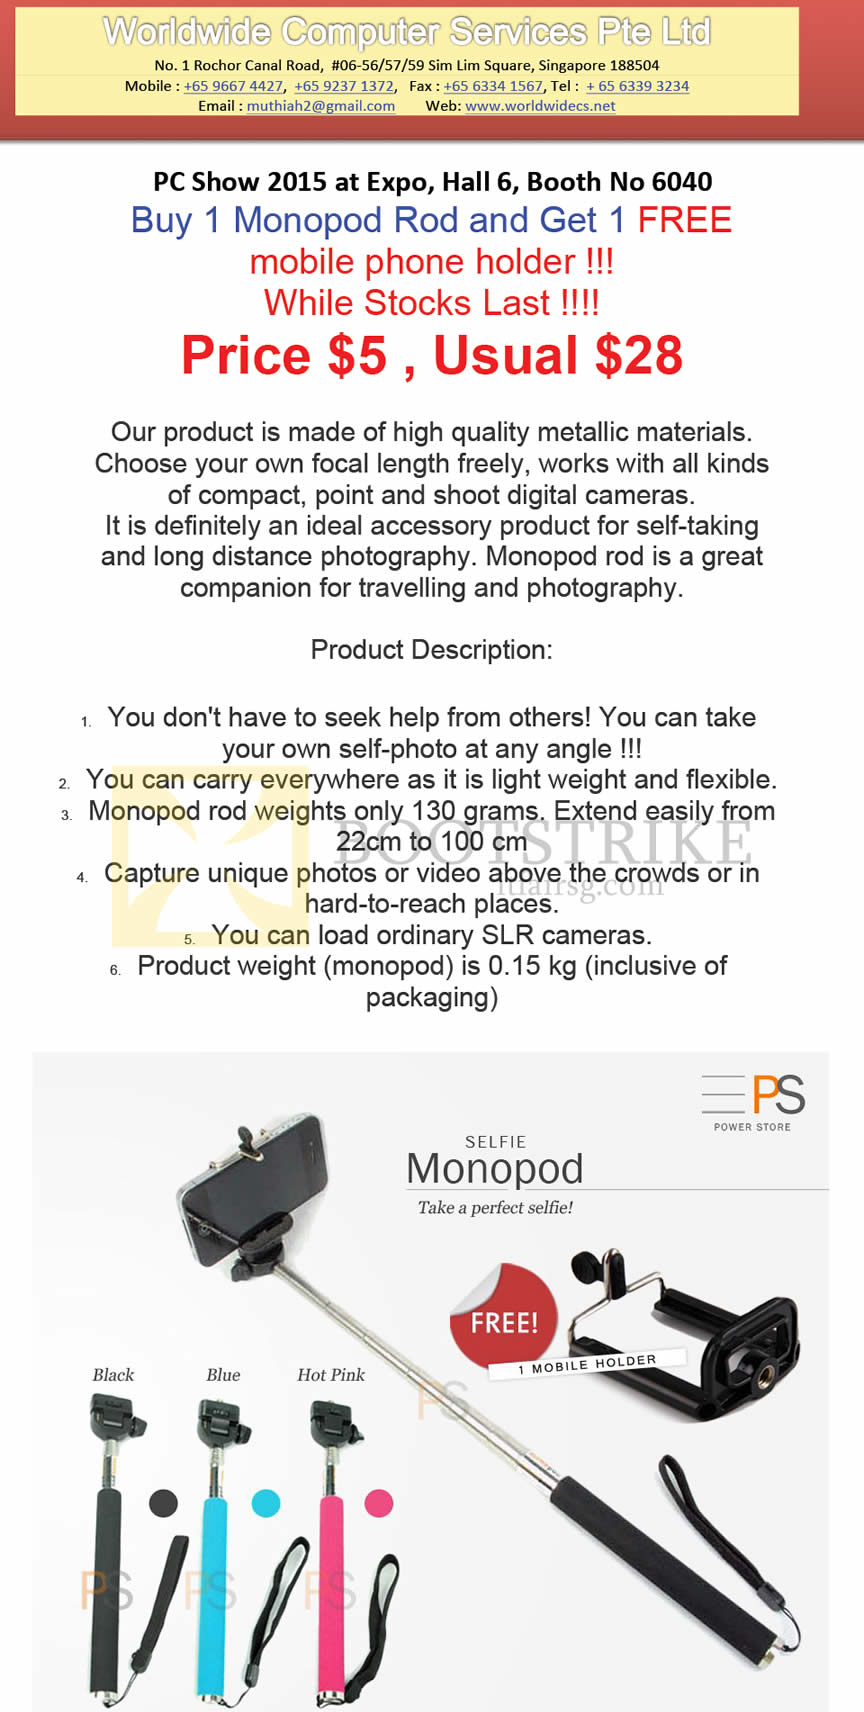 PC SHOW 2015 price list image brochure of Worldwide Computer Services Buy 1 Monopod Rod Get 1 Free